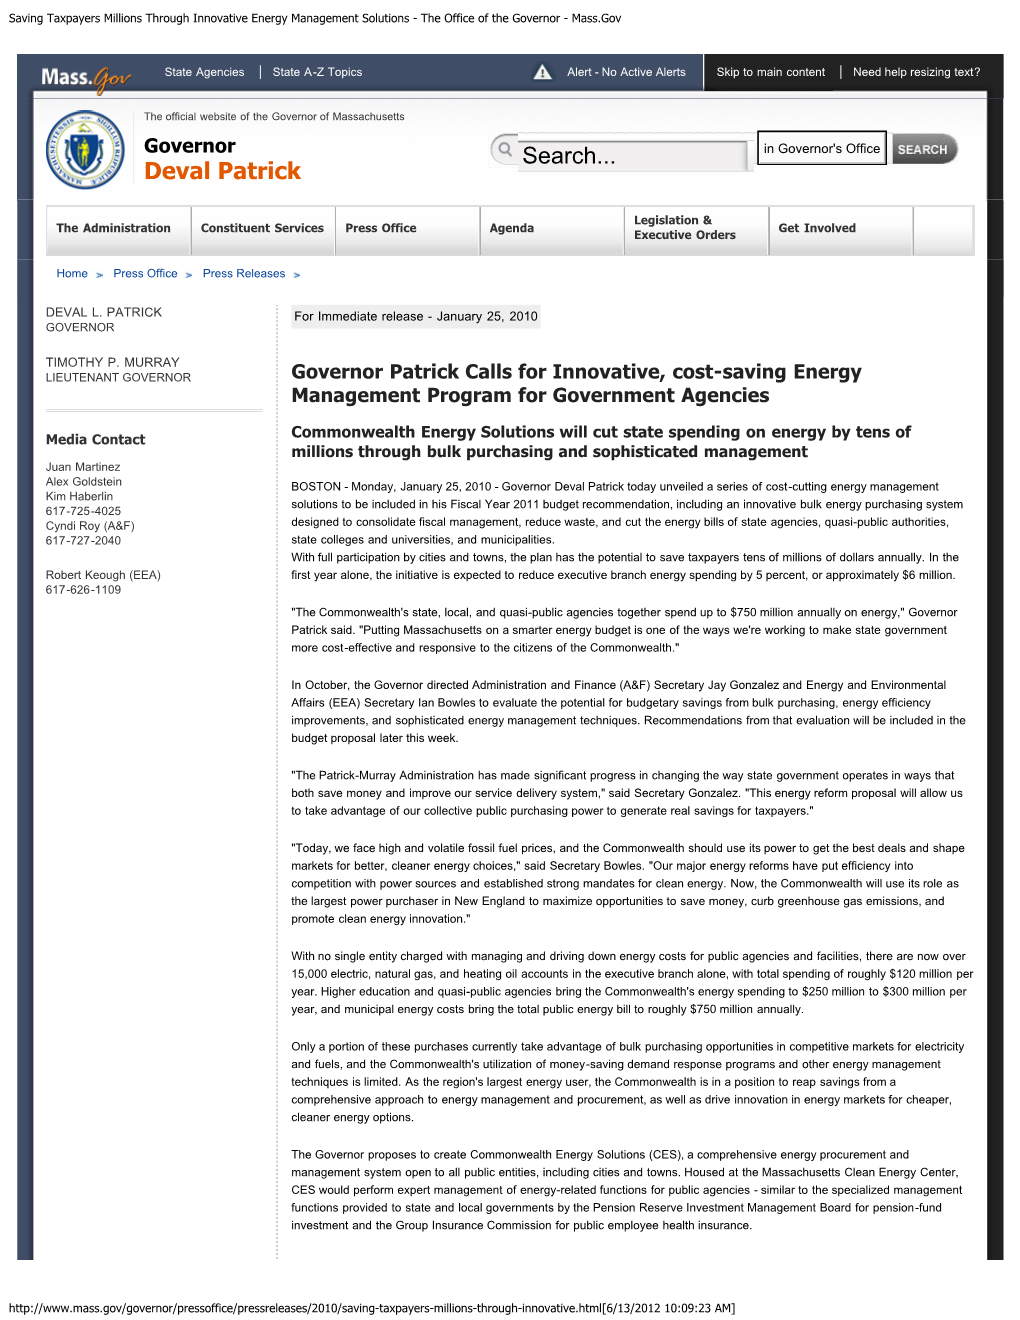 Saving Taxpayers Millions Through Innovative Energy Management Solutions - the Office of the Governor - Mass.Gov